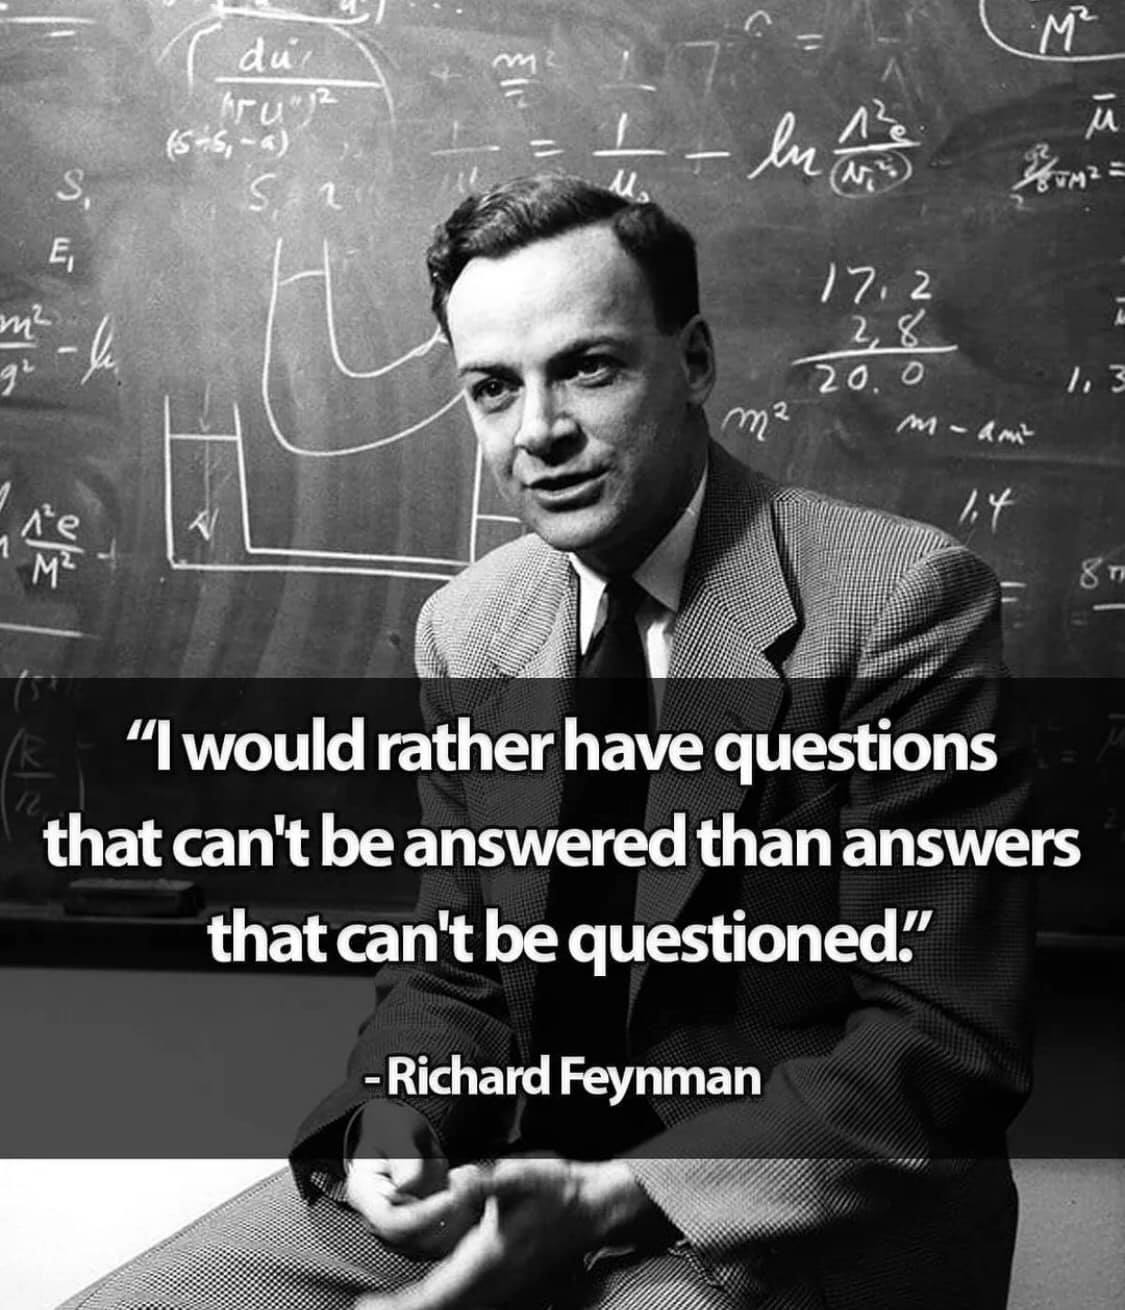 A wise quote from Richard Feyman about answers and questions